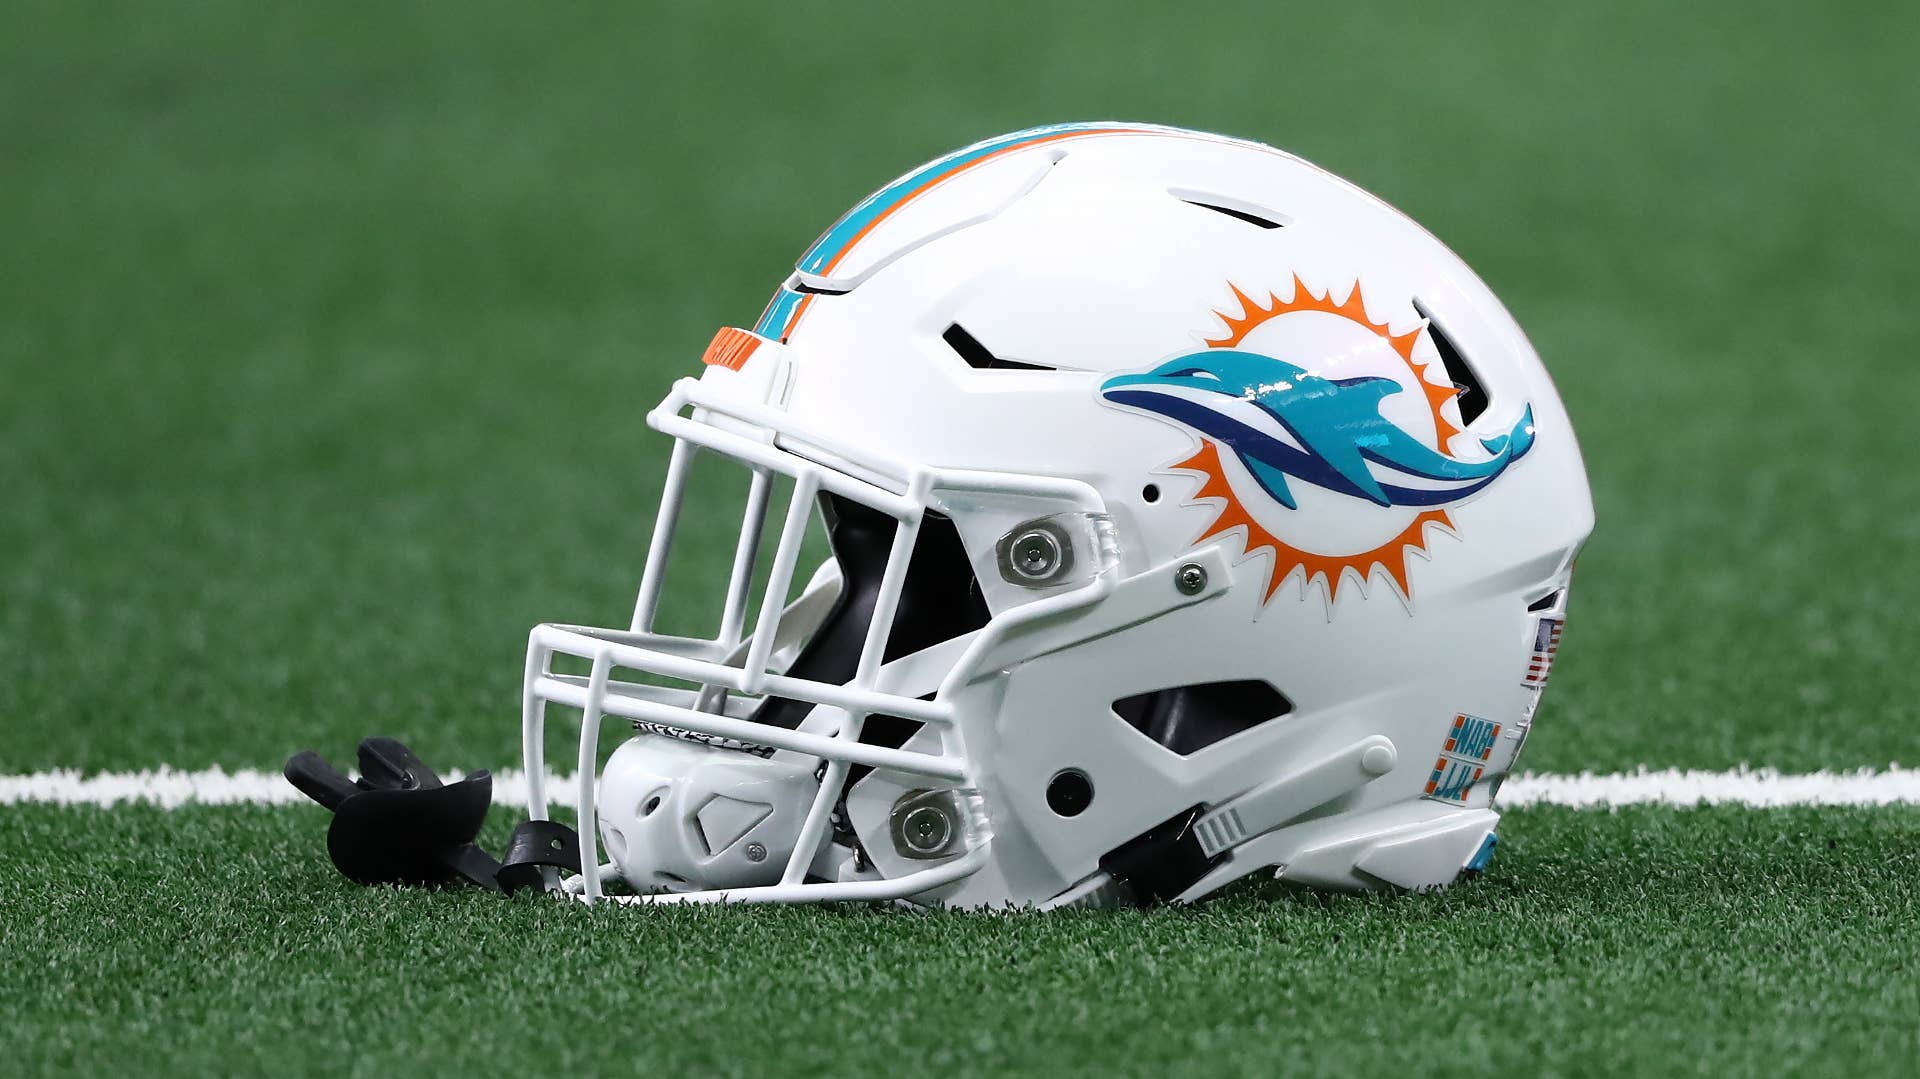 A Miami Dolphins helmet on the field.